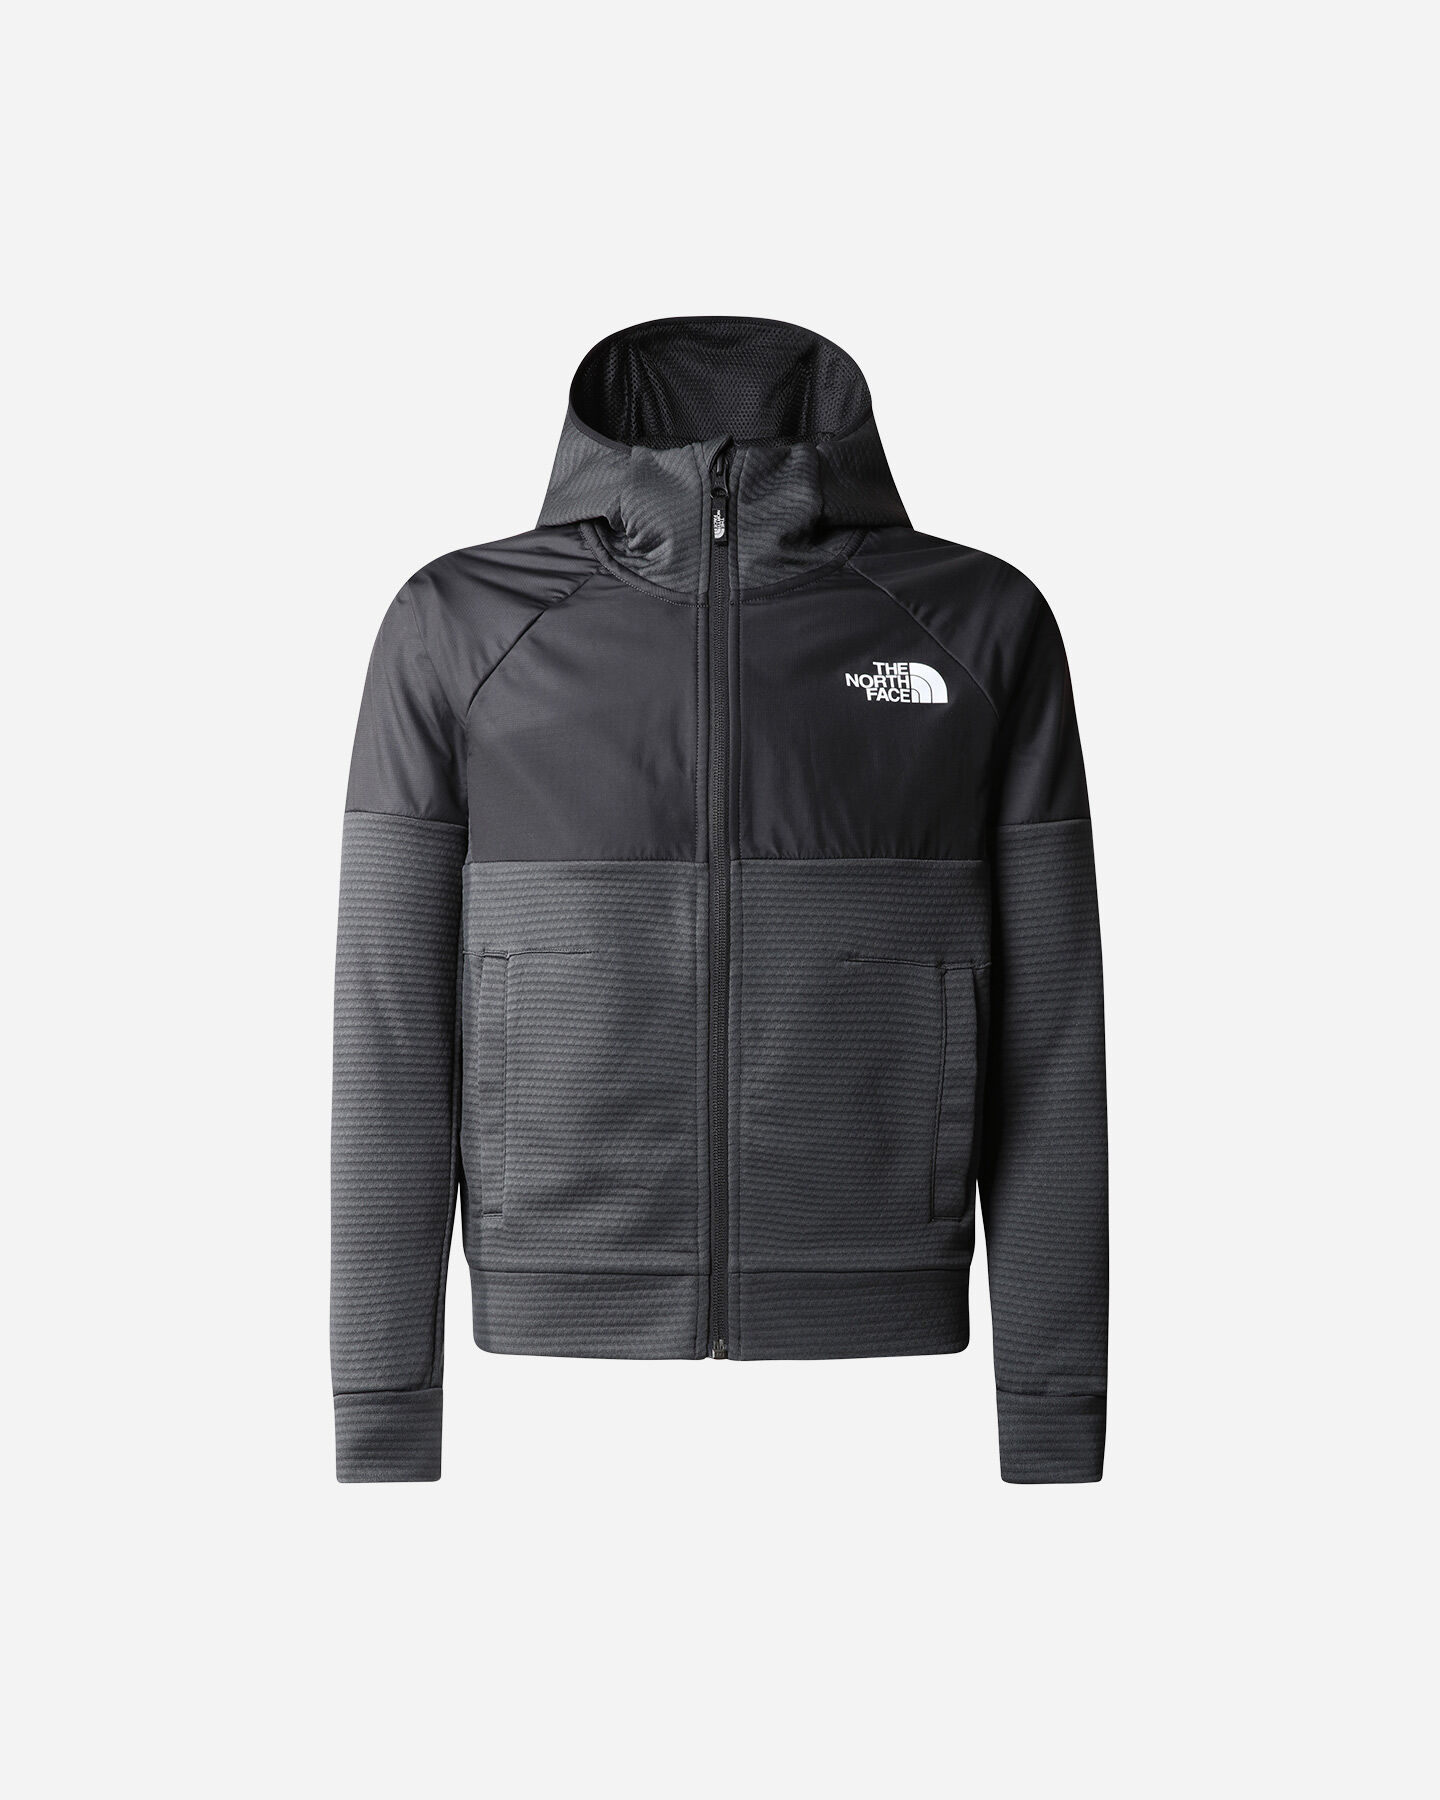  Pile THE NORTH FACE MOUNTAIN ATHLETICS JR S5537320|0C5|M scatto 0